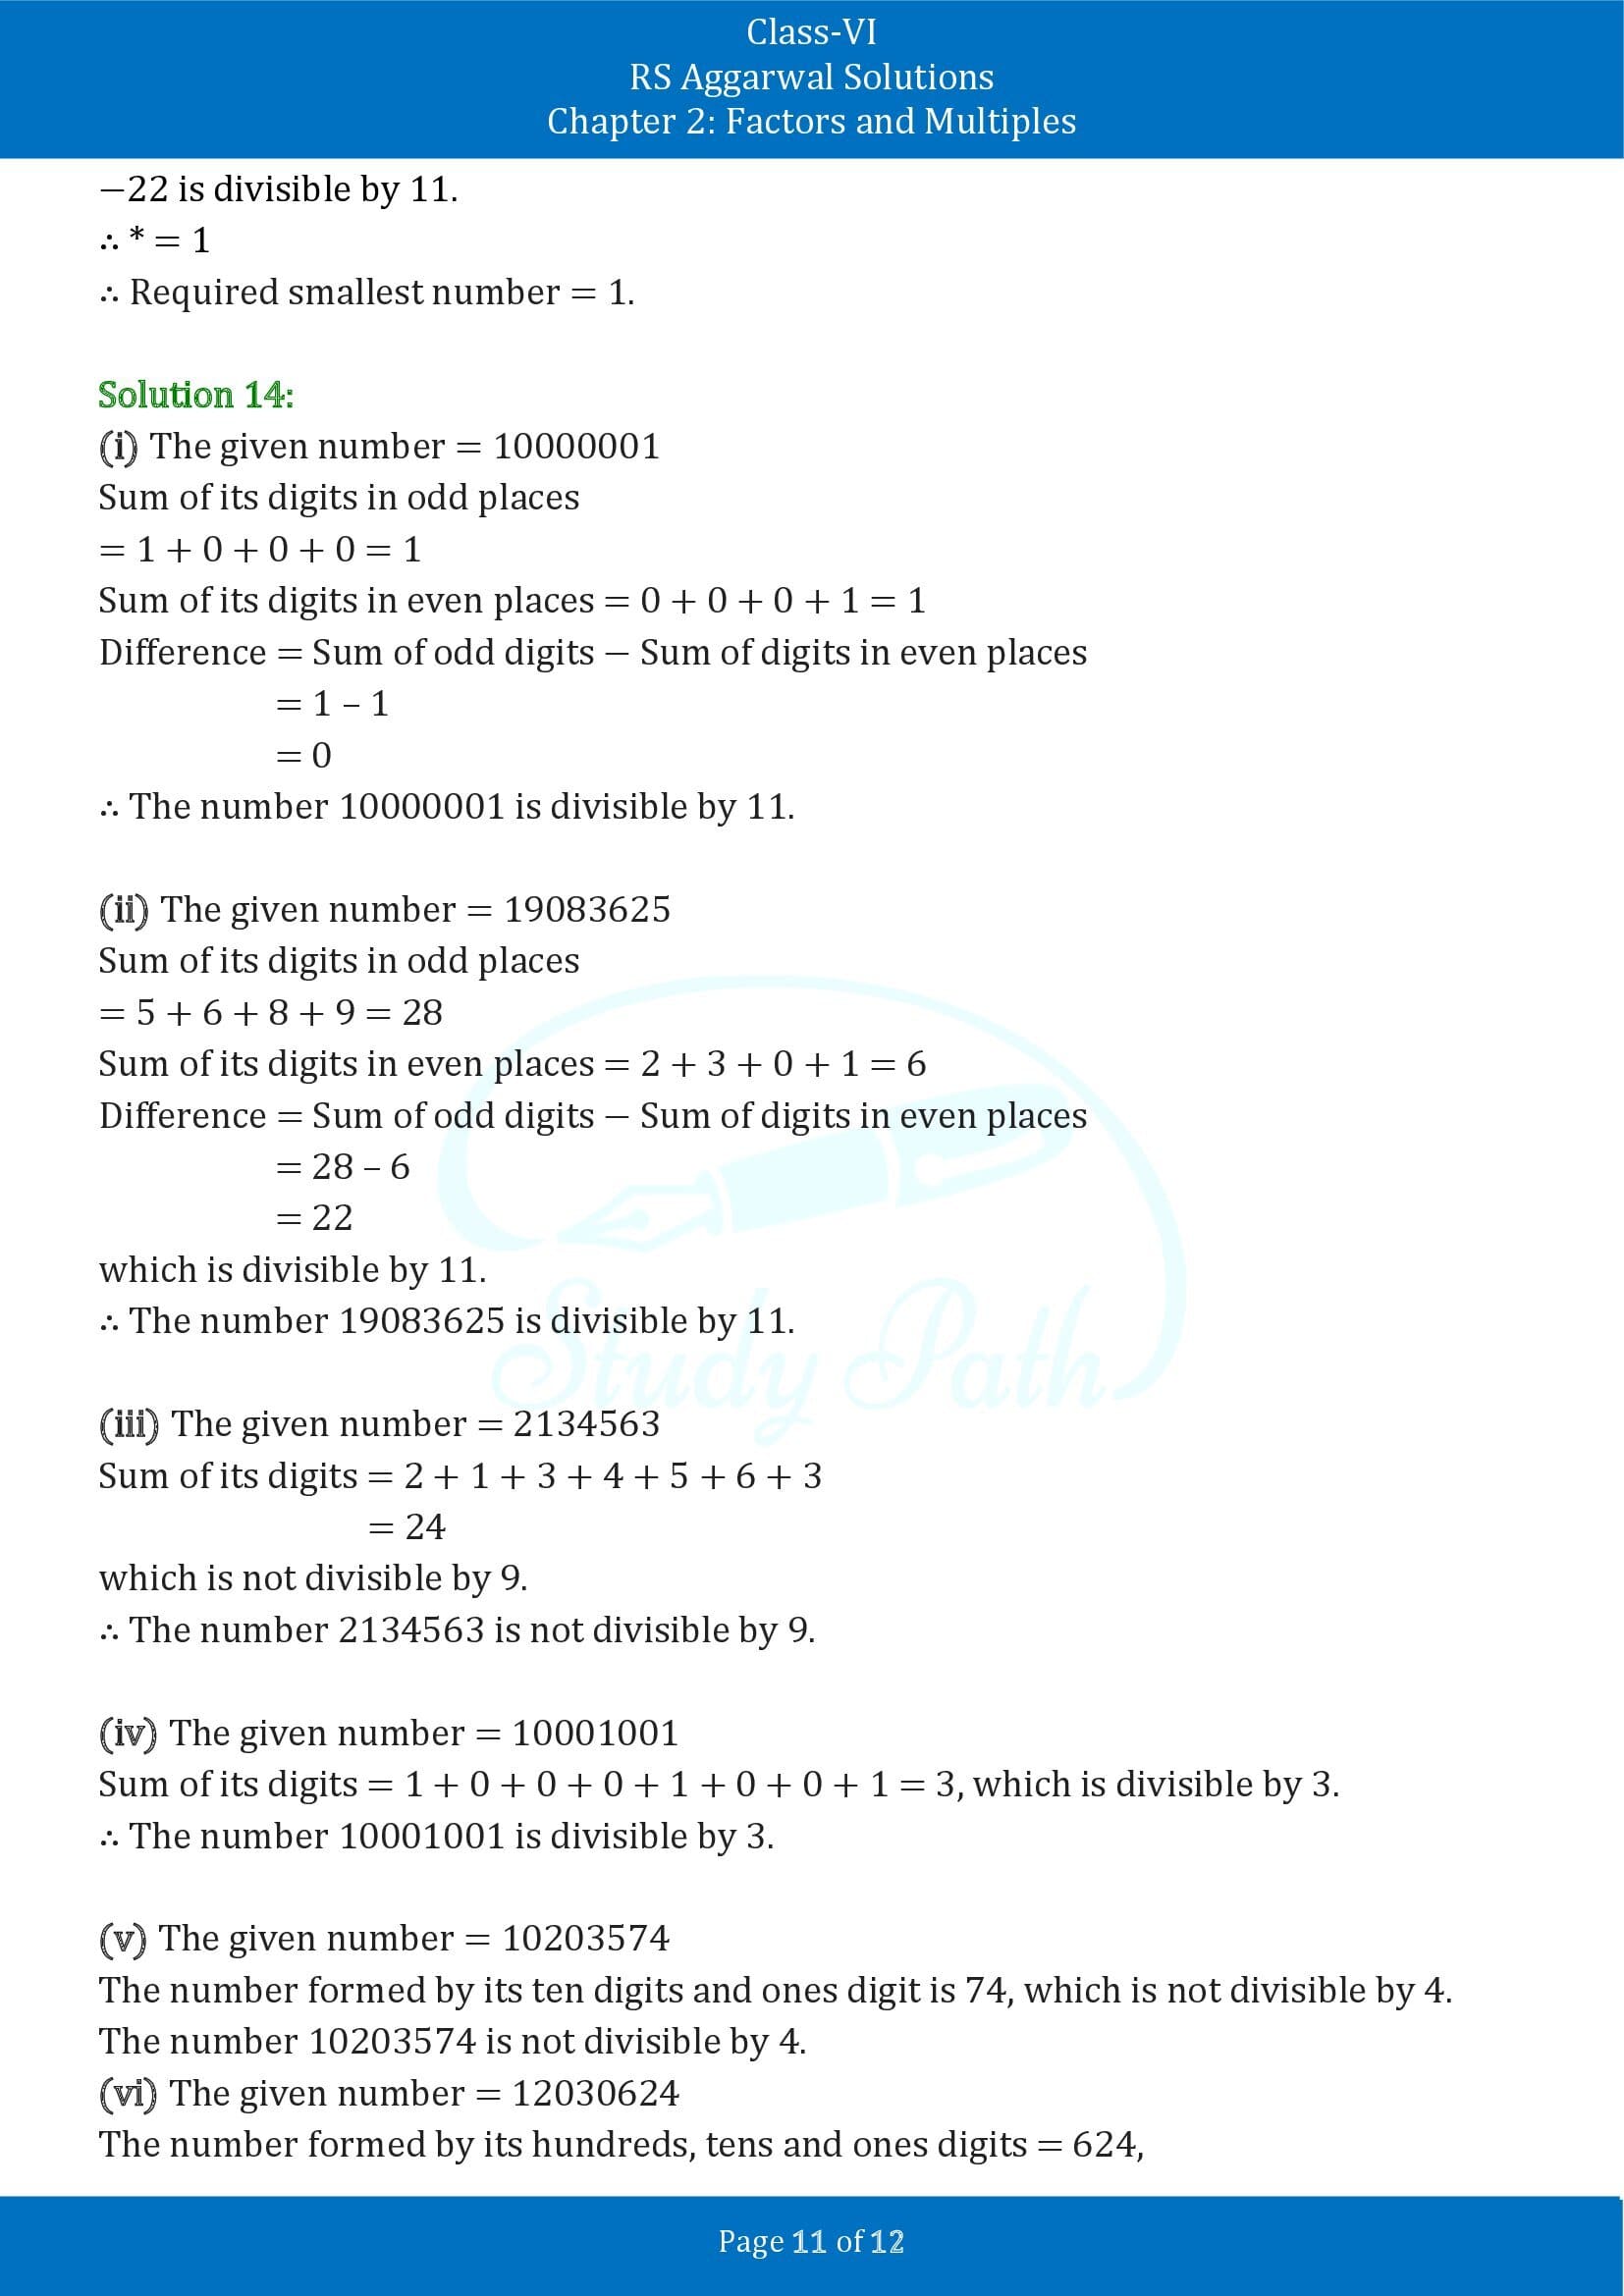 RS Aggarwal Solutions Class 6 Chapter 2 Factors and Multiples Exercise 2B 00011